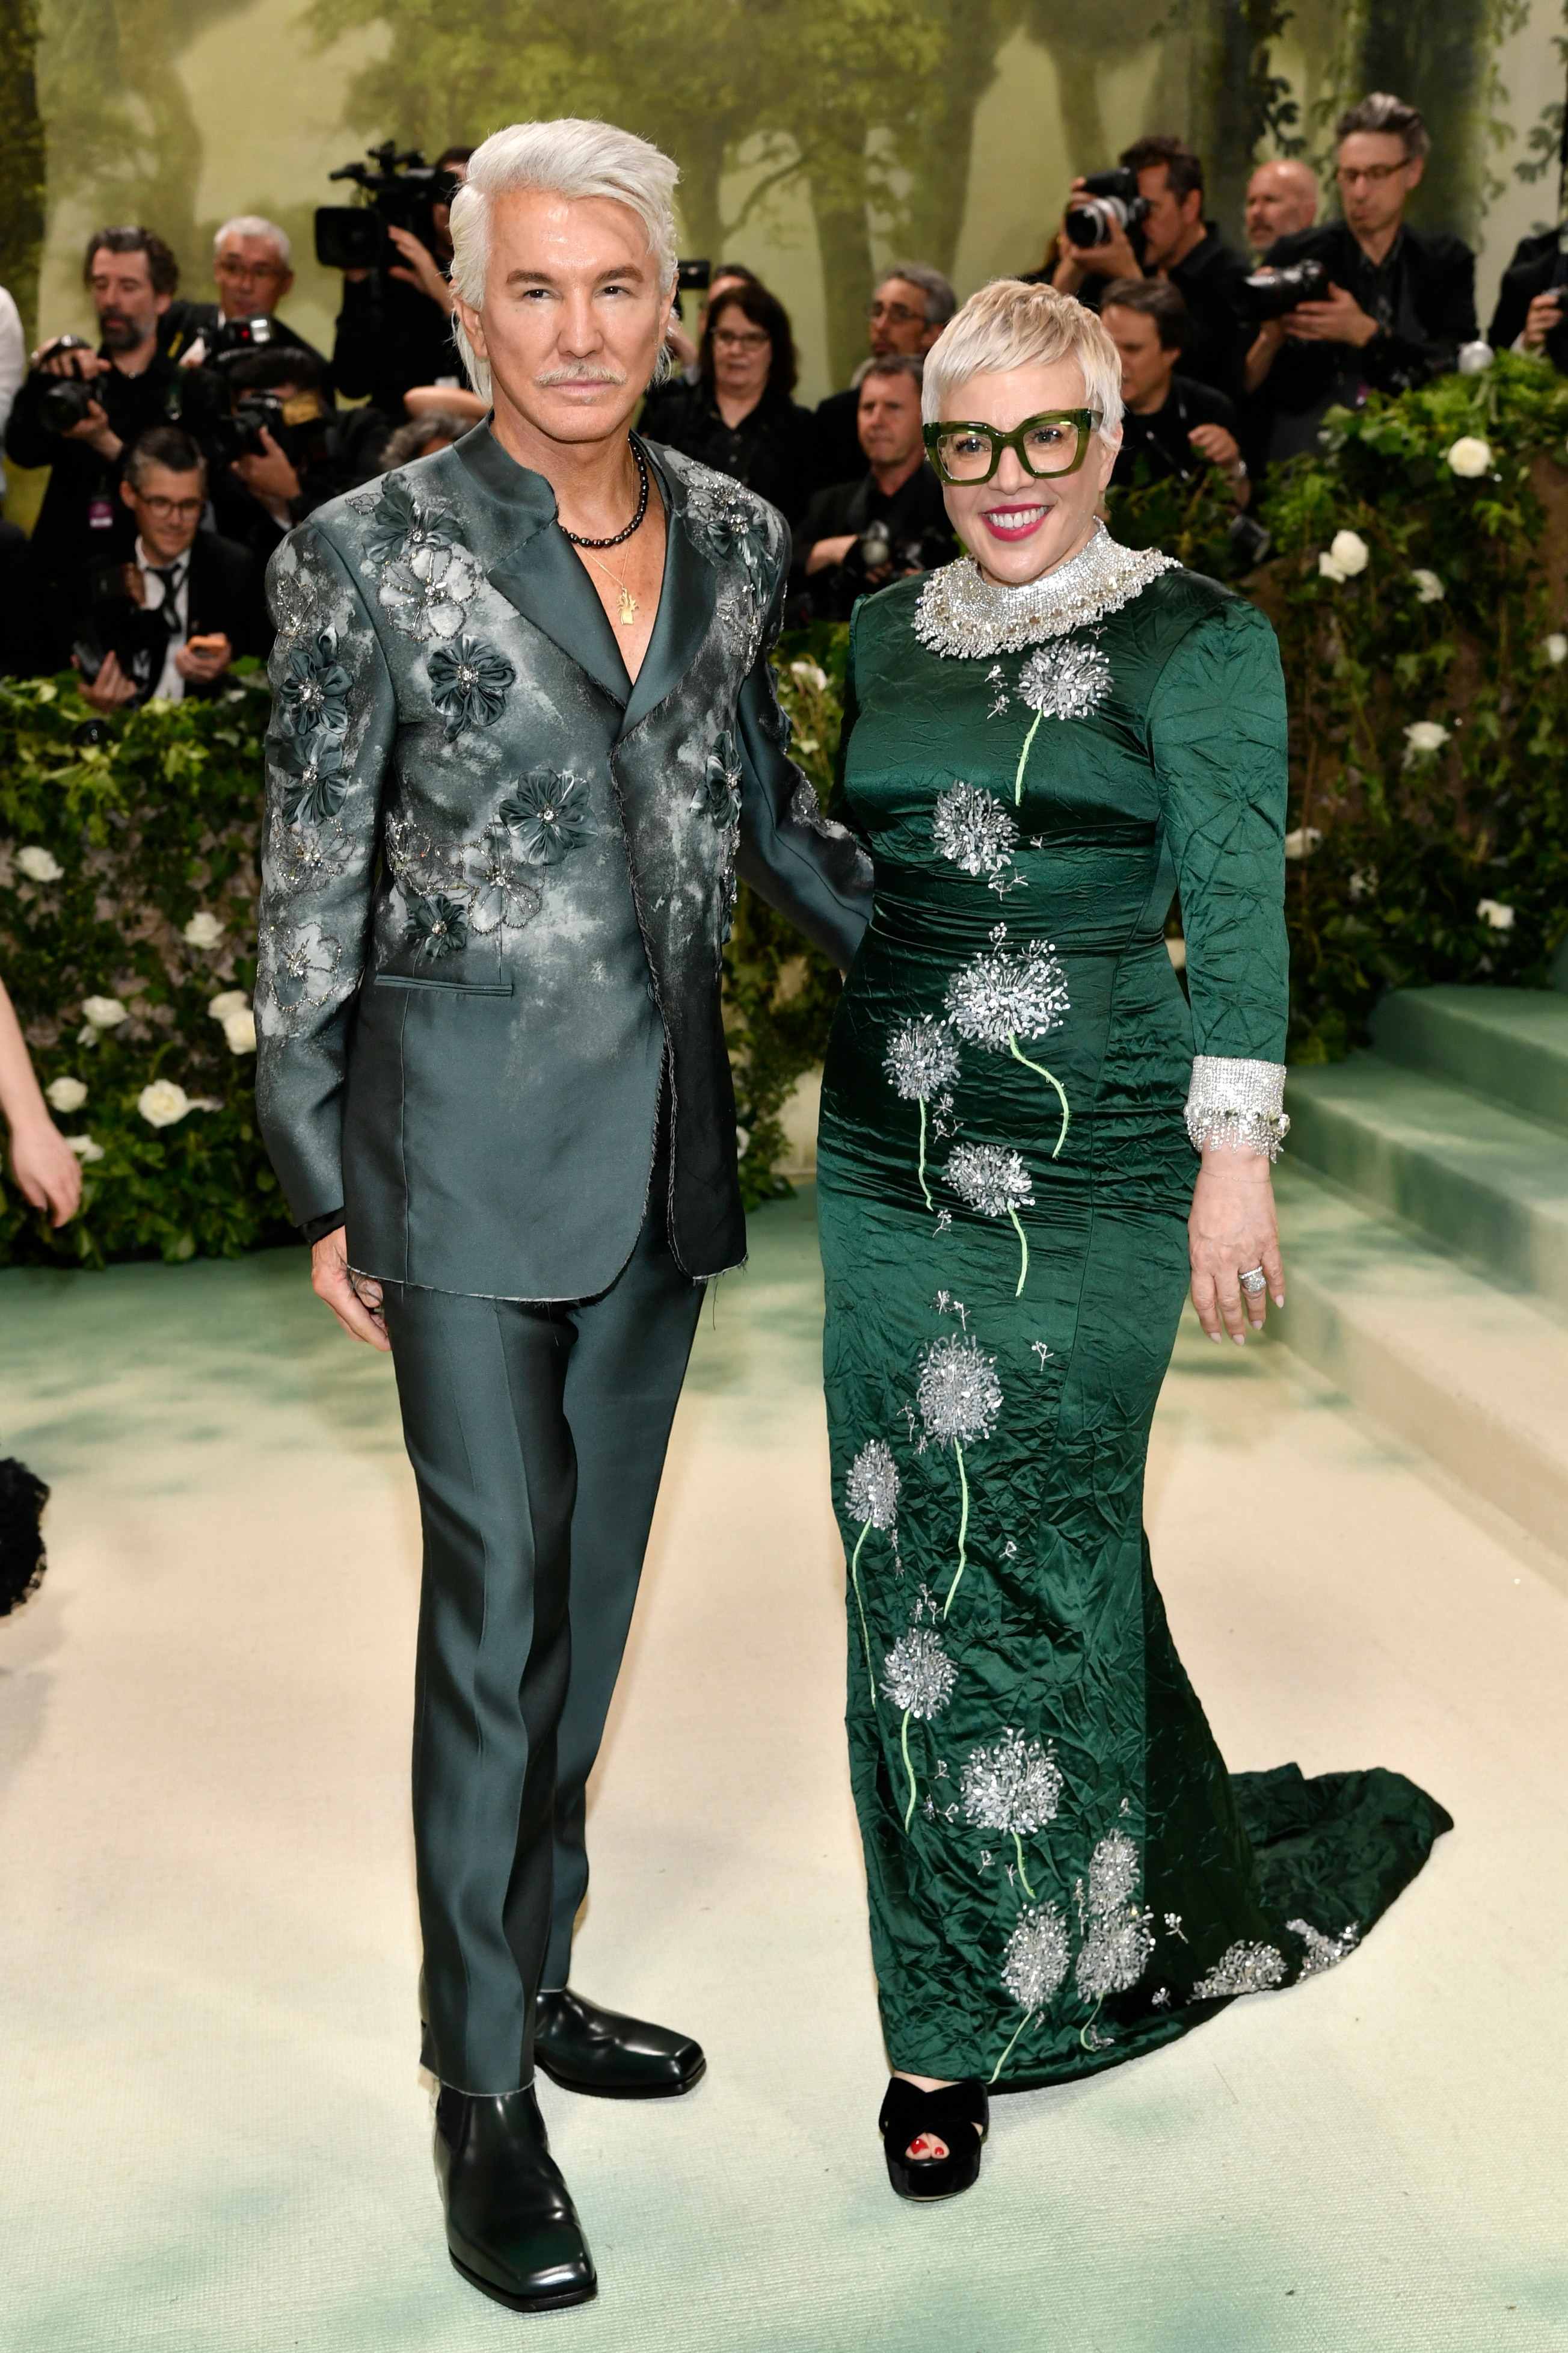 Baz Luhrmann wearing a dark green and silver suit and Catherine Martin in a dark green long sleeve dress with silver flowers